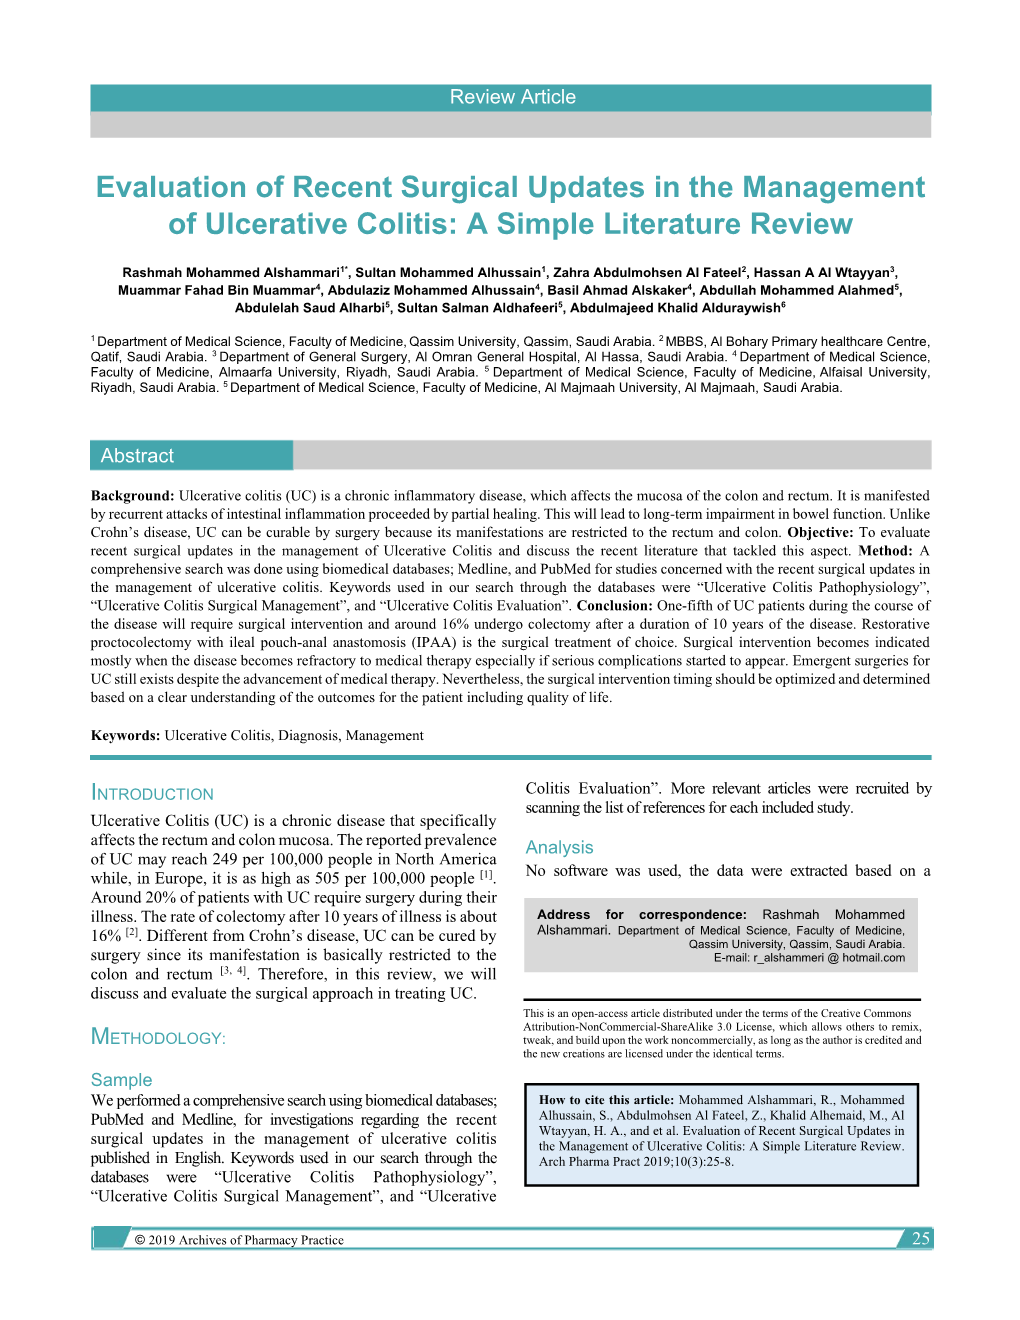 Evaluation of Recent Surgical Updates in the Management of Ulcerative Colitis: a Simple Literature Review